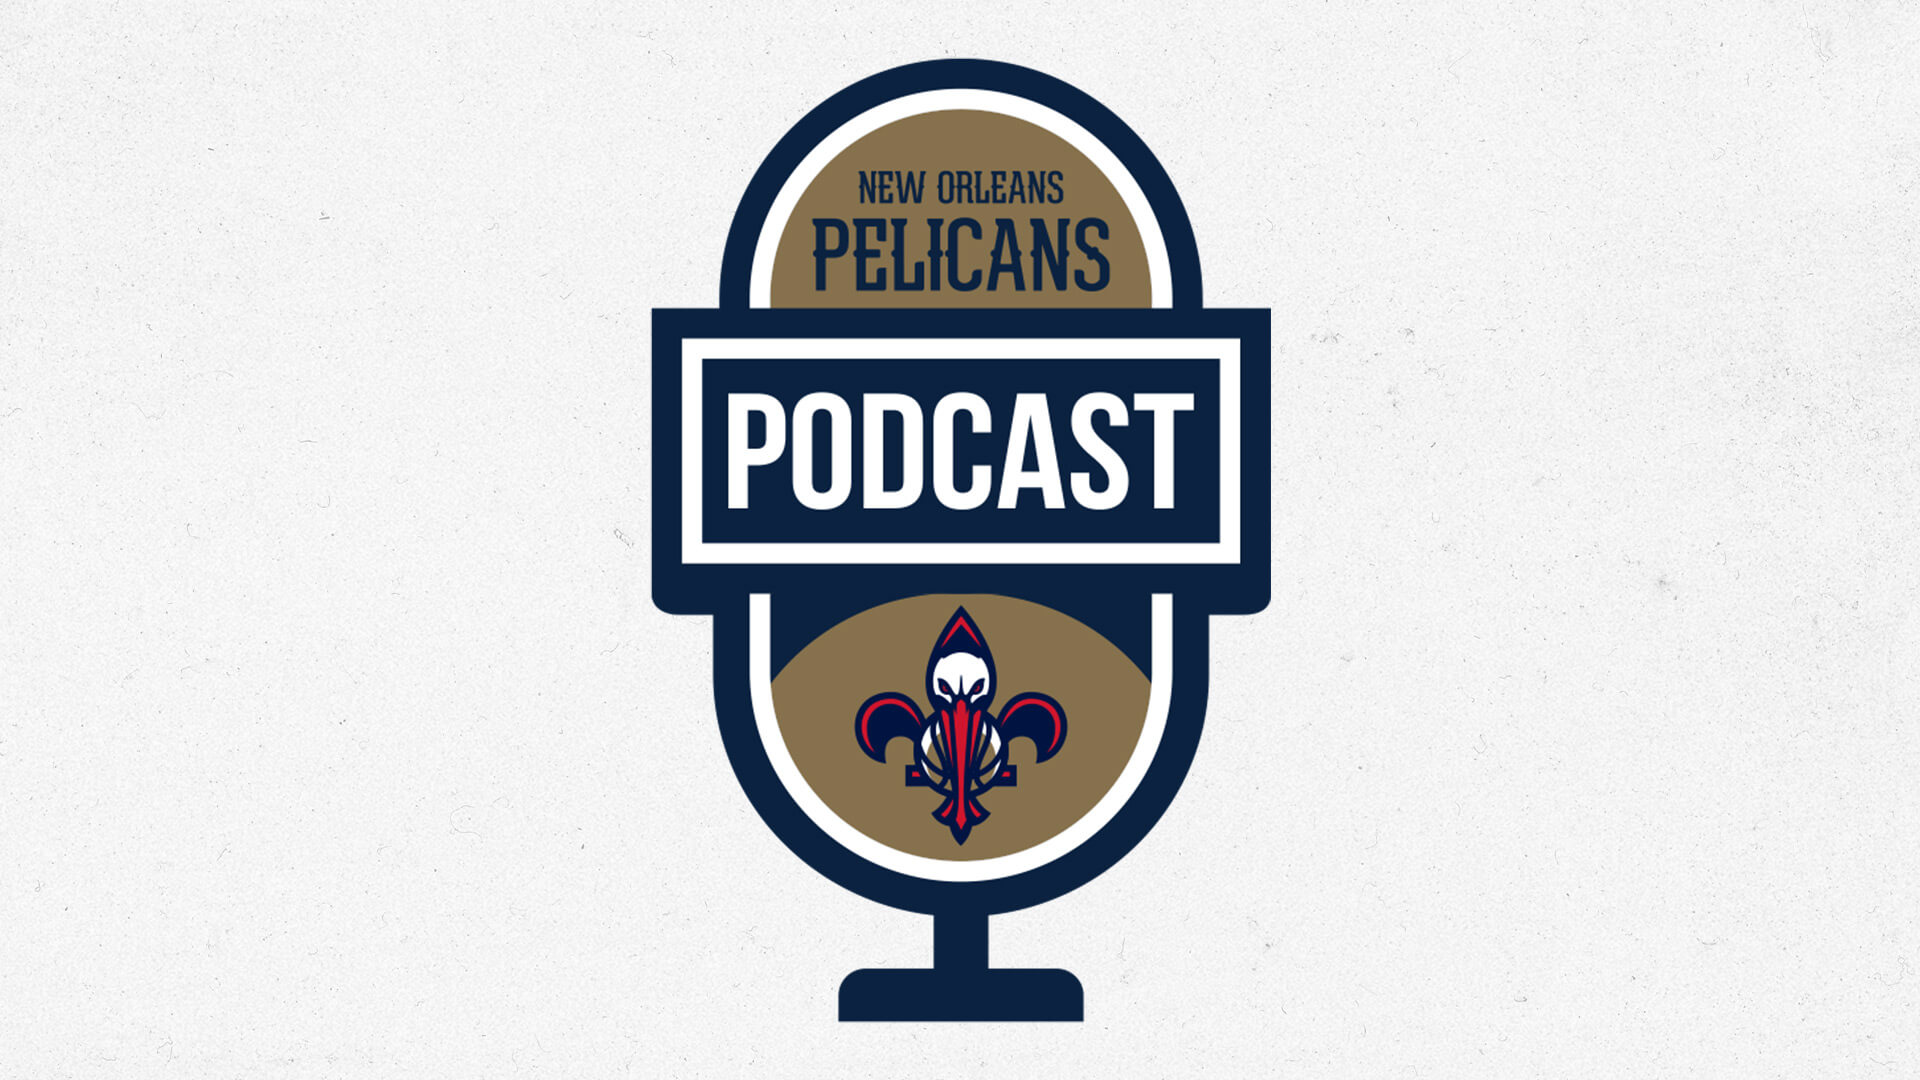 Will Guillory on the New Orleans Pelicans podcast presented by SeatGeek - May 14, 2021